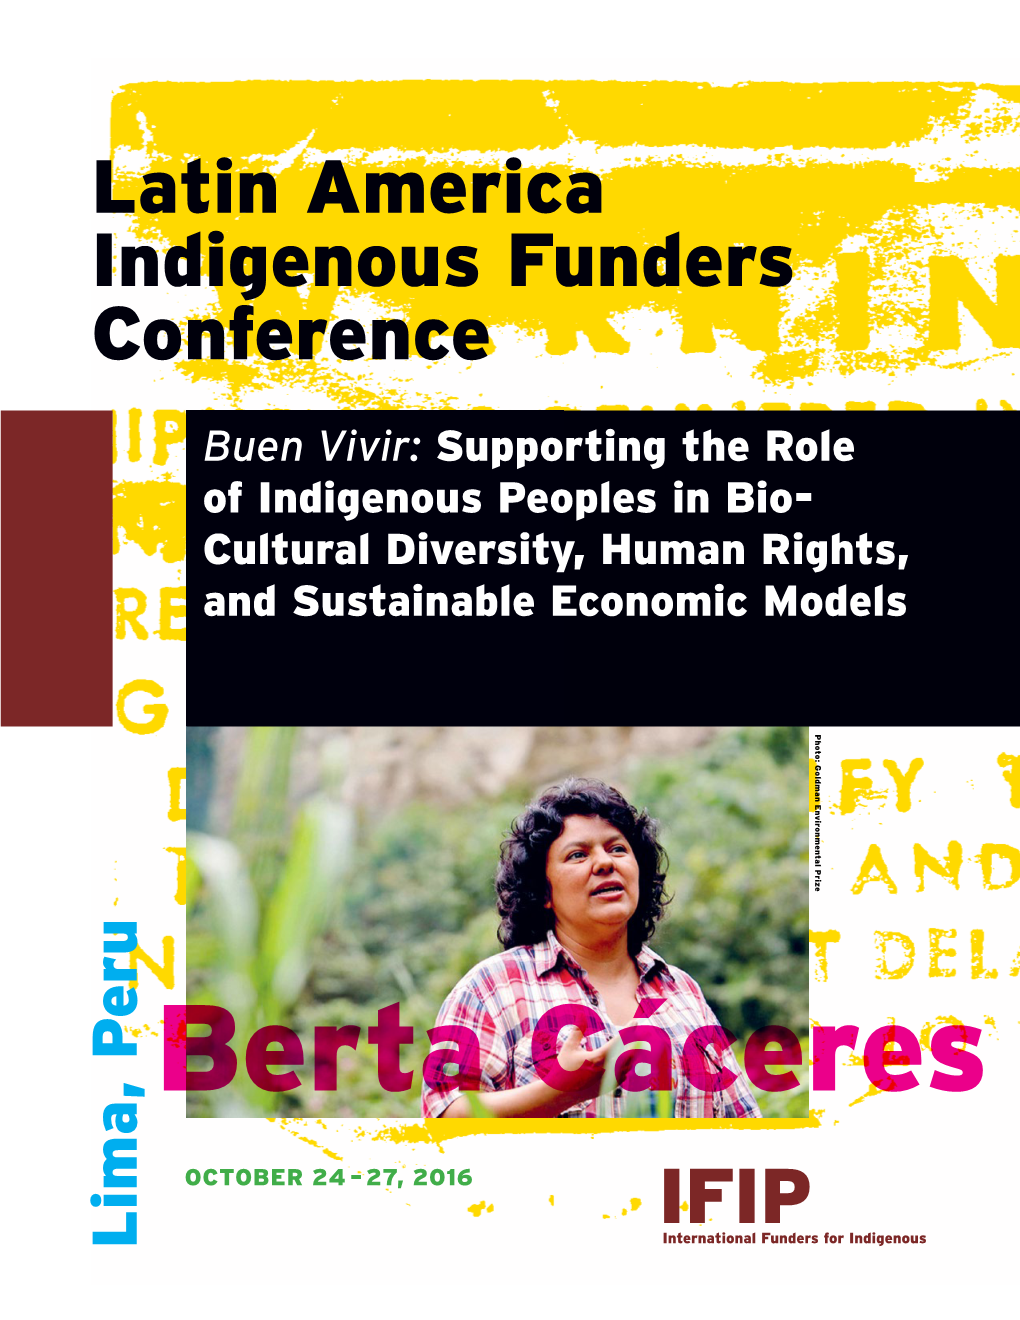 Latin America Indigenous Funders Conference